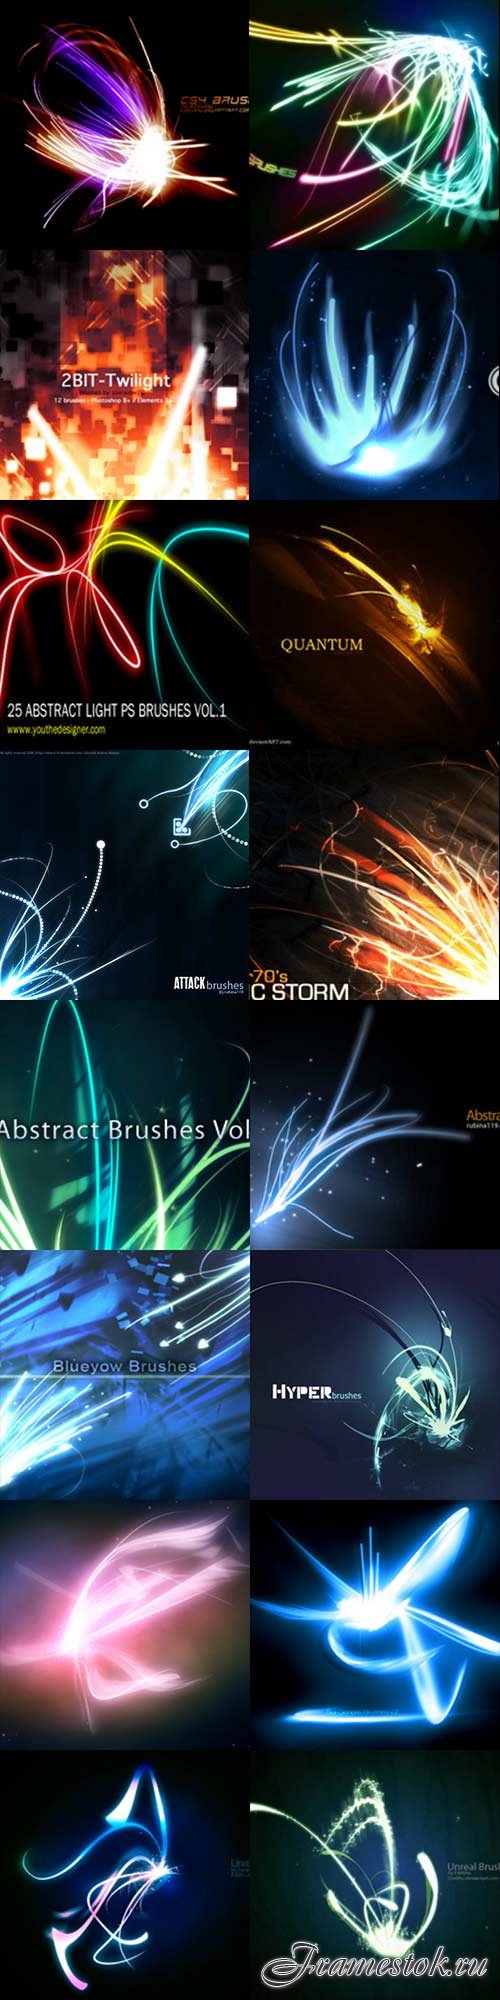 Abstract lines brushes - 2